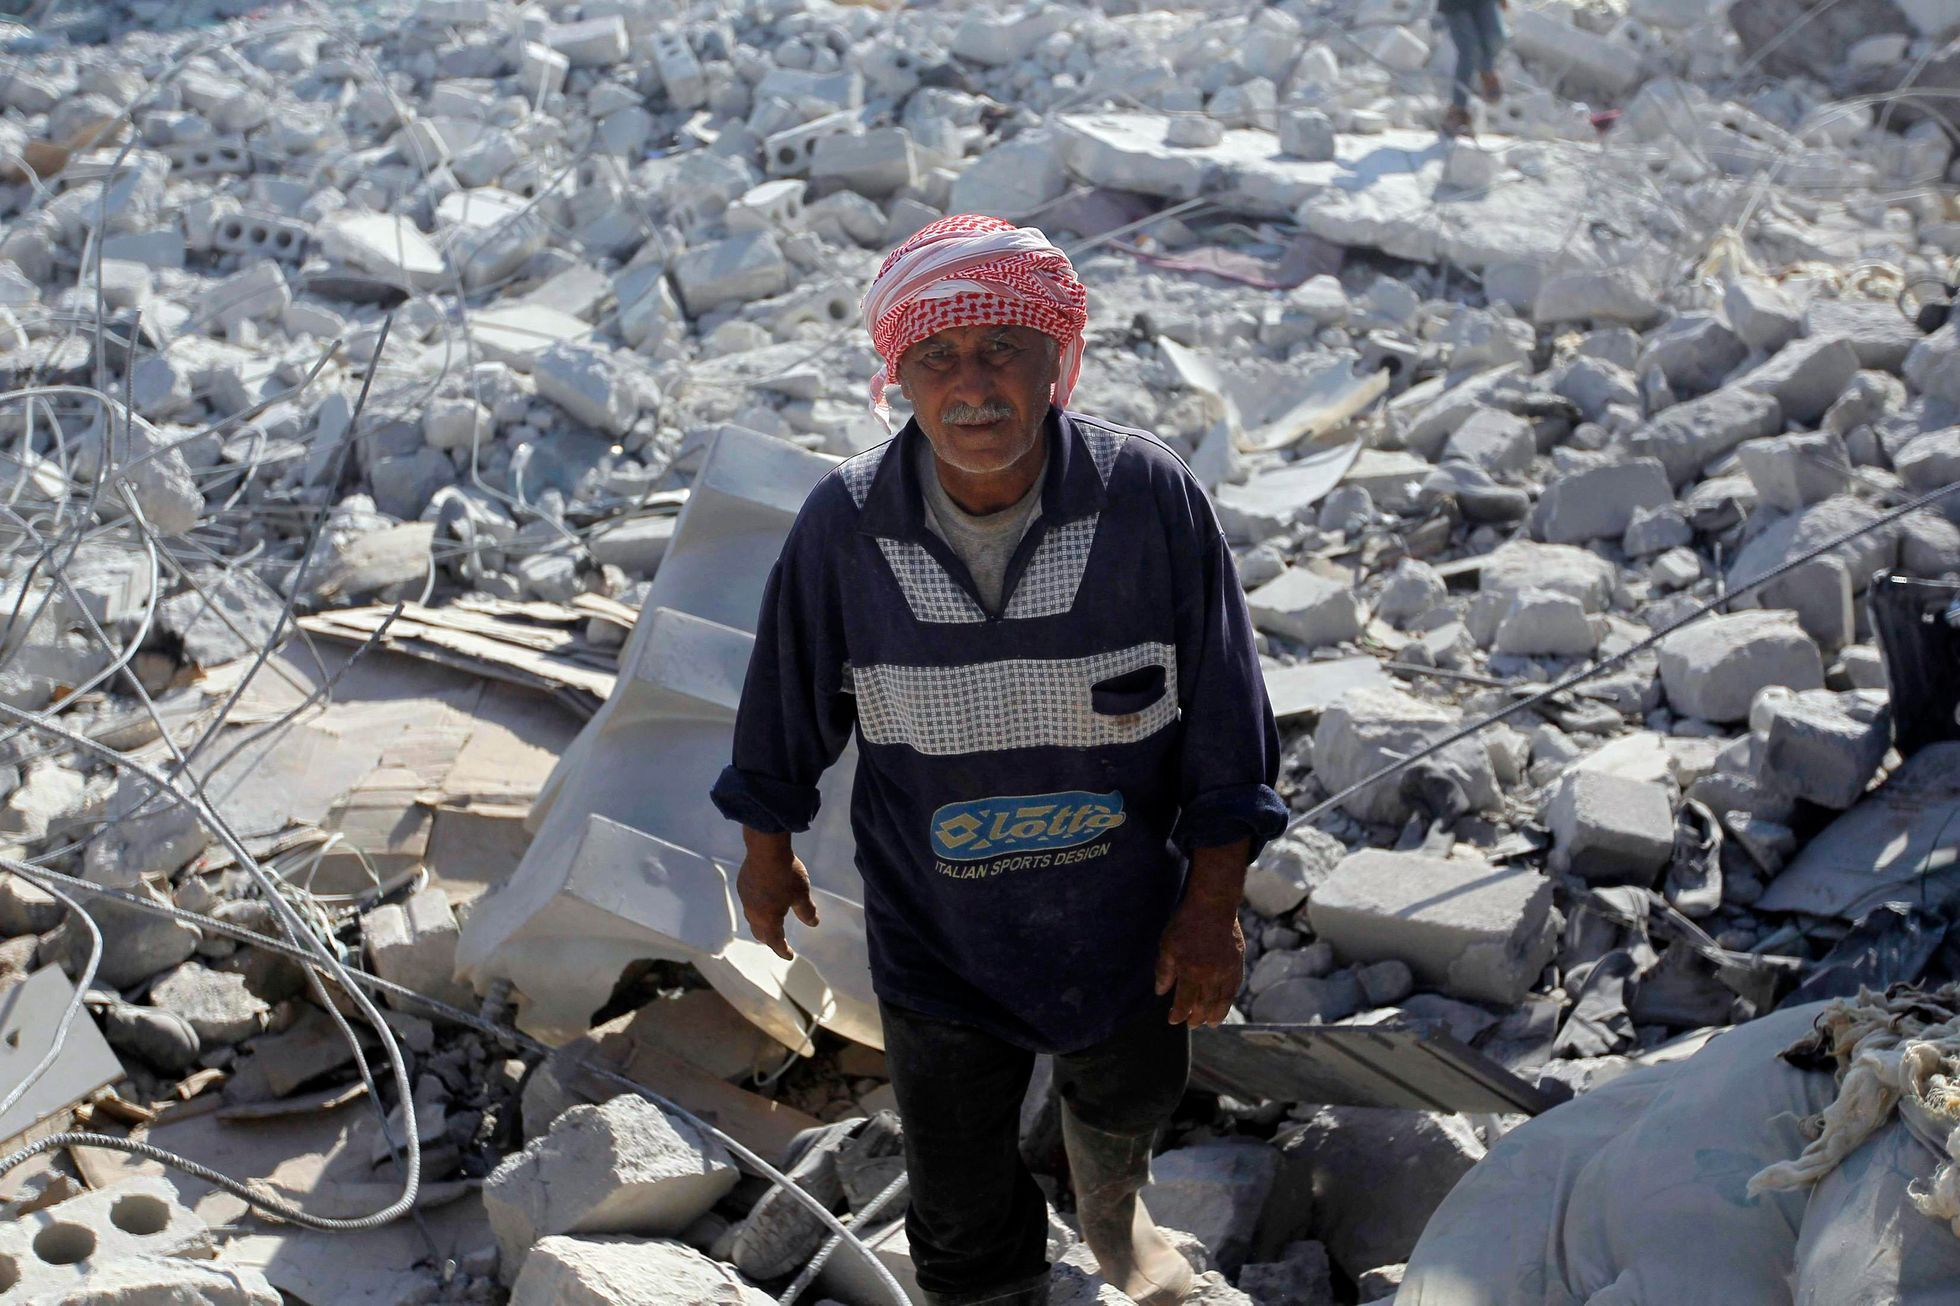 A man inspects a damaged site in what activists say was a U.S. strike, in Kfredrian